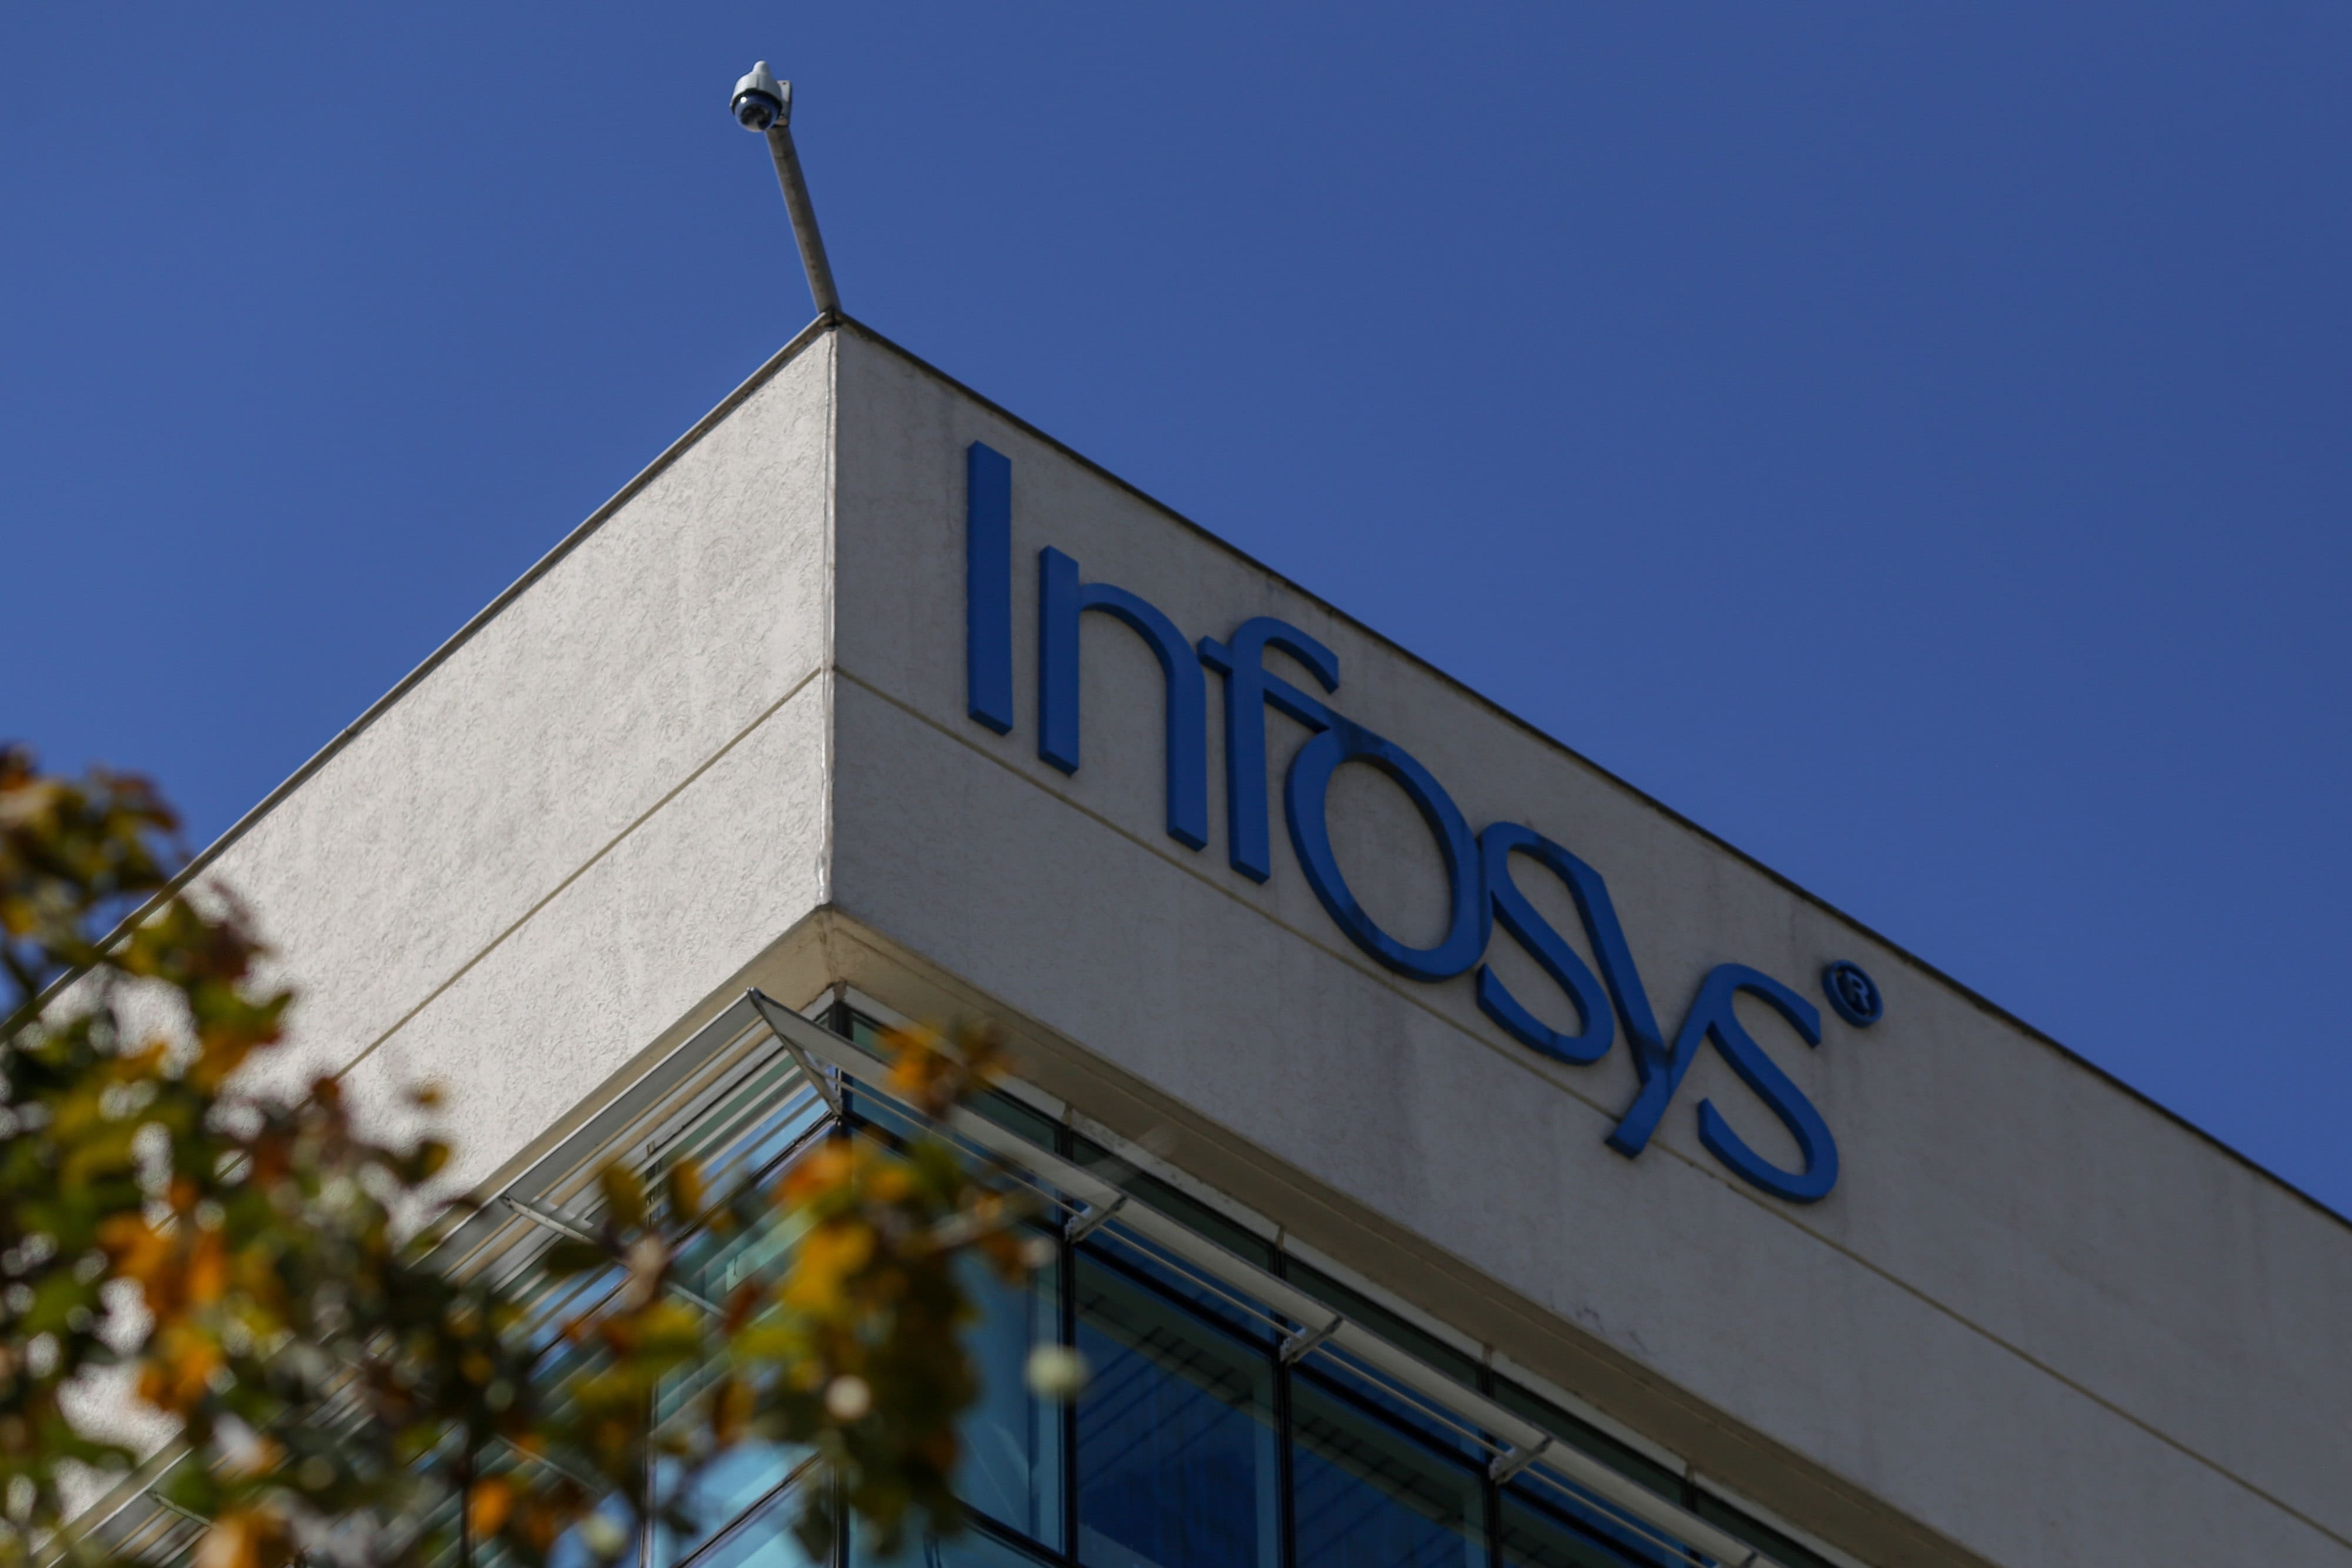 Infosys: The brokerage has a 'buy' call on the stock with a target at  <span class='webrupee'>₹</span>2,100 per share, indicating an upside of 10 percent. Demand environment is promising; tech spending remains strong, noted the brokerage, adding that cCloud, data, AI, automation and cyber security are key client priorities. Demand will remain strong post cloud migration phase as well, Kotak said. It expects earnings to grow by 15.6 percent in FY23E and 13.3 percent in FY24E.